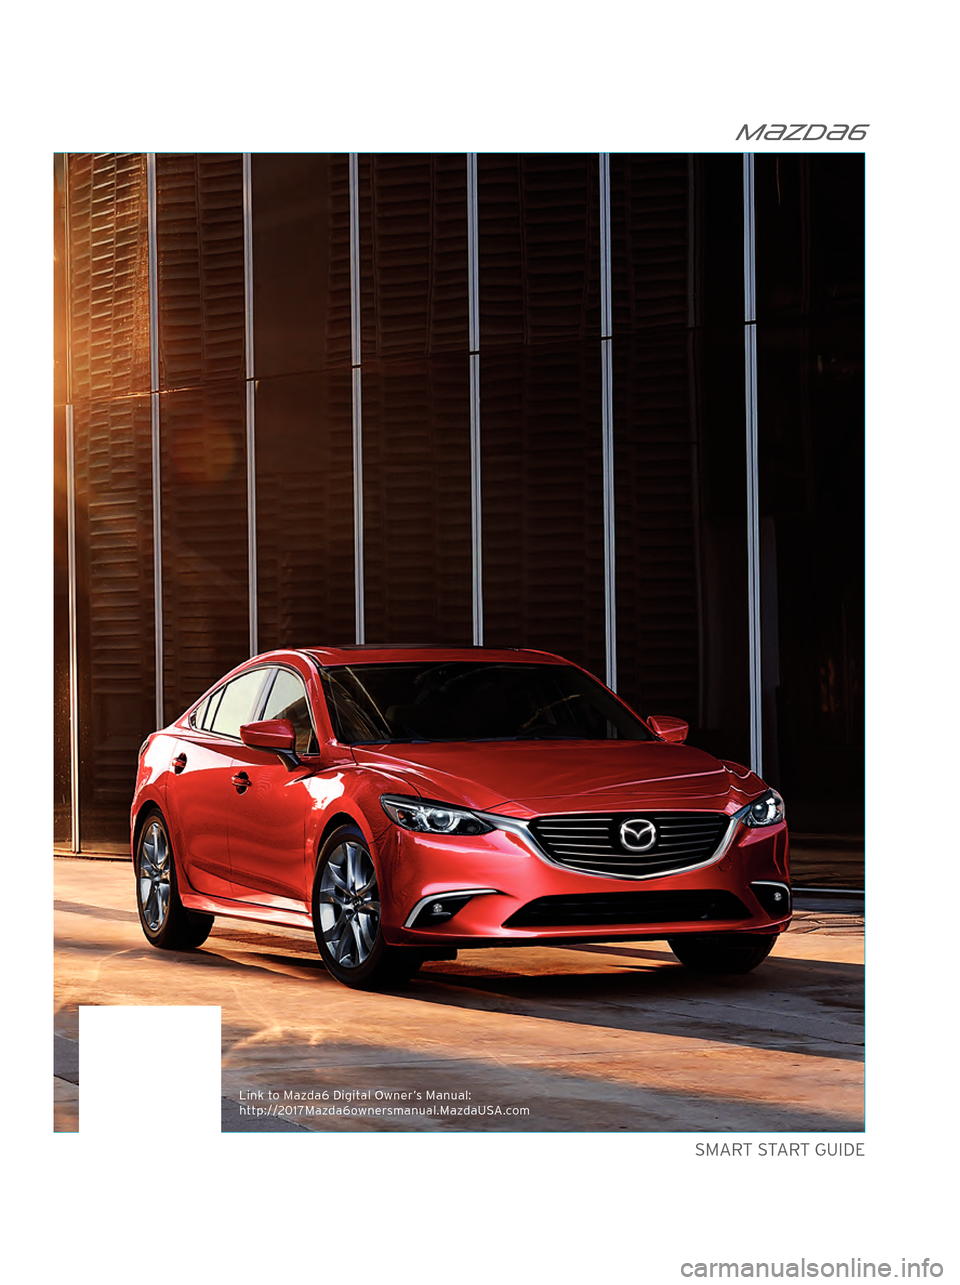 MAZDA MODEL 6 2017  Quick Start Guide (in English)  m{zd{6
 SMART START GUIDE 
Link to Maz\fa6 Digital Owner’s Manual:
\bttp://2017Maz\fa6ownersmanual.Maz\faUSA.com 